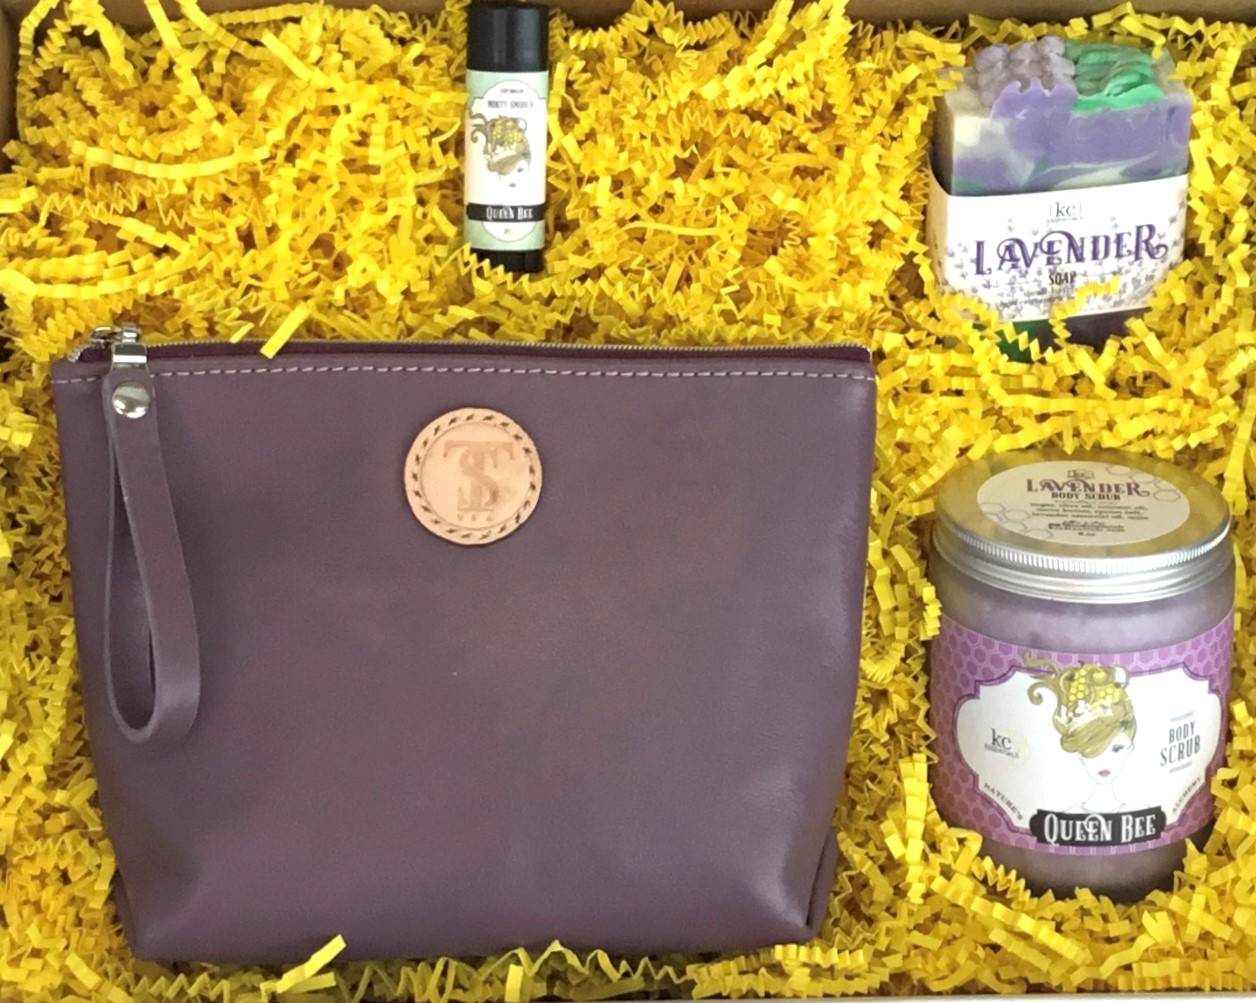 Town &amp; Shore Handcrafted Serenity Gift set featuring T5 Leather bath kit and brush bag shown in Lavender purple calfskin leather. KC Essentials artisan made vegan bar soap, essential oils body scrub and soothing lip balm. Arranged in gift box with sustainable eco-friendly yellow crinkle paper.